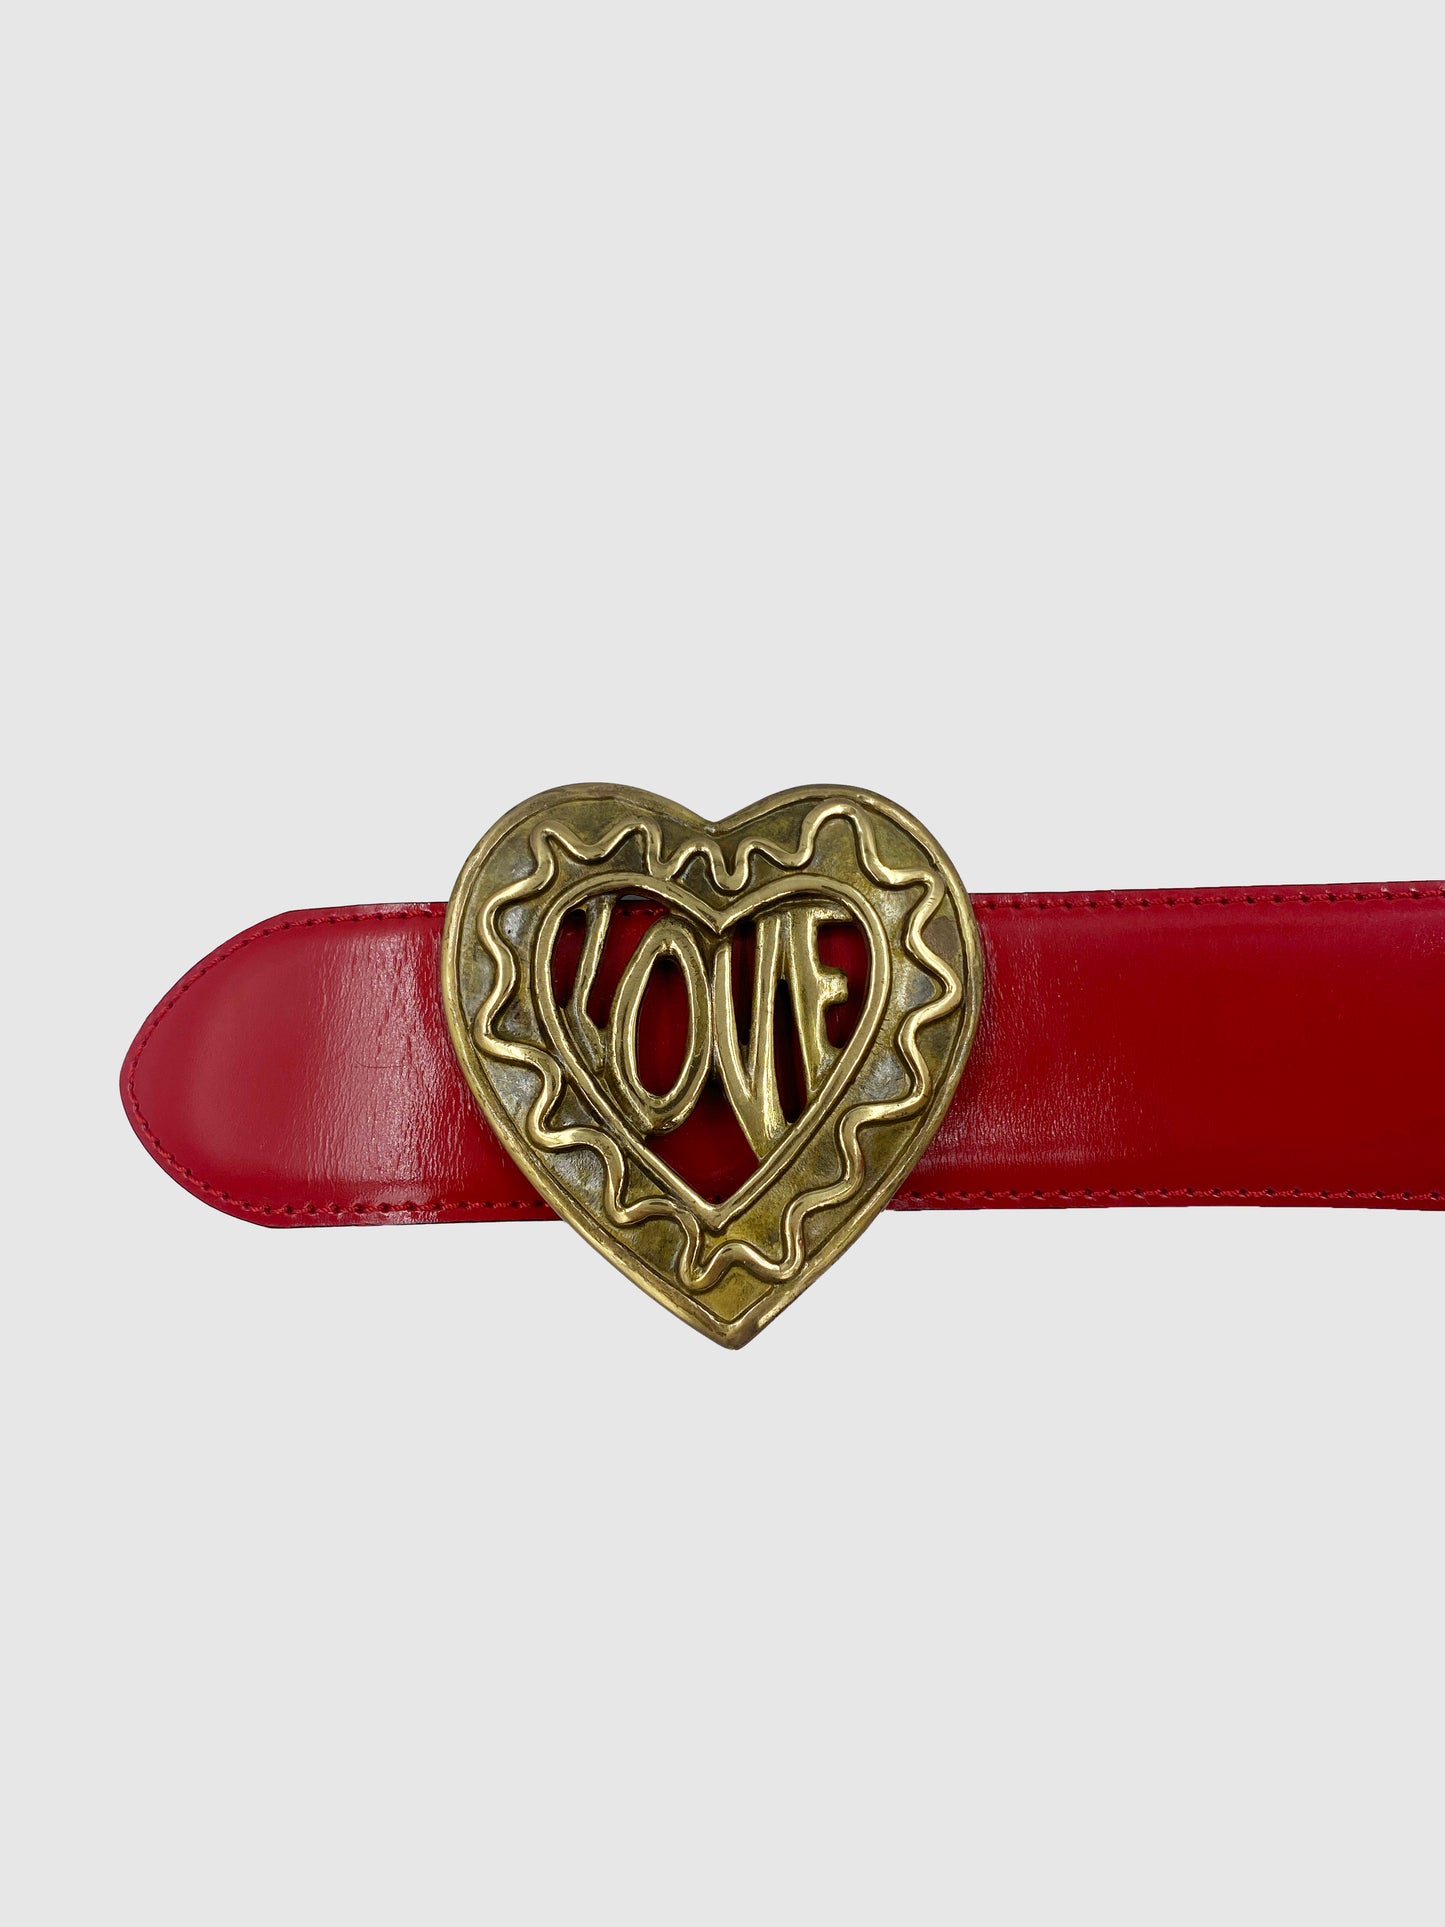 Moschino Red Leather w/ Heart Shape Buckle Belt - Size 44